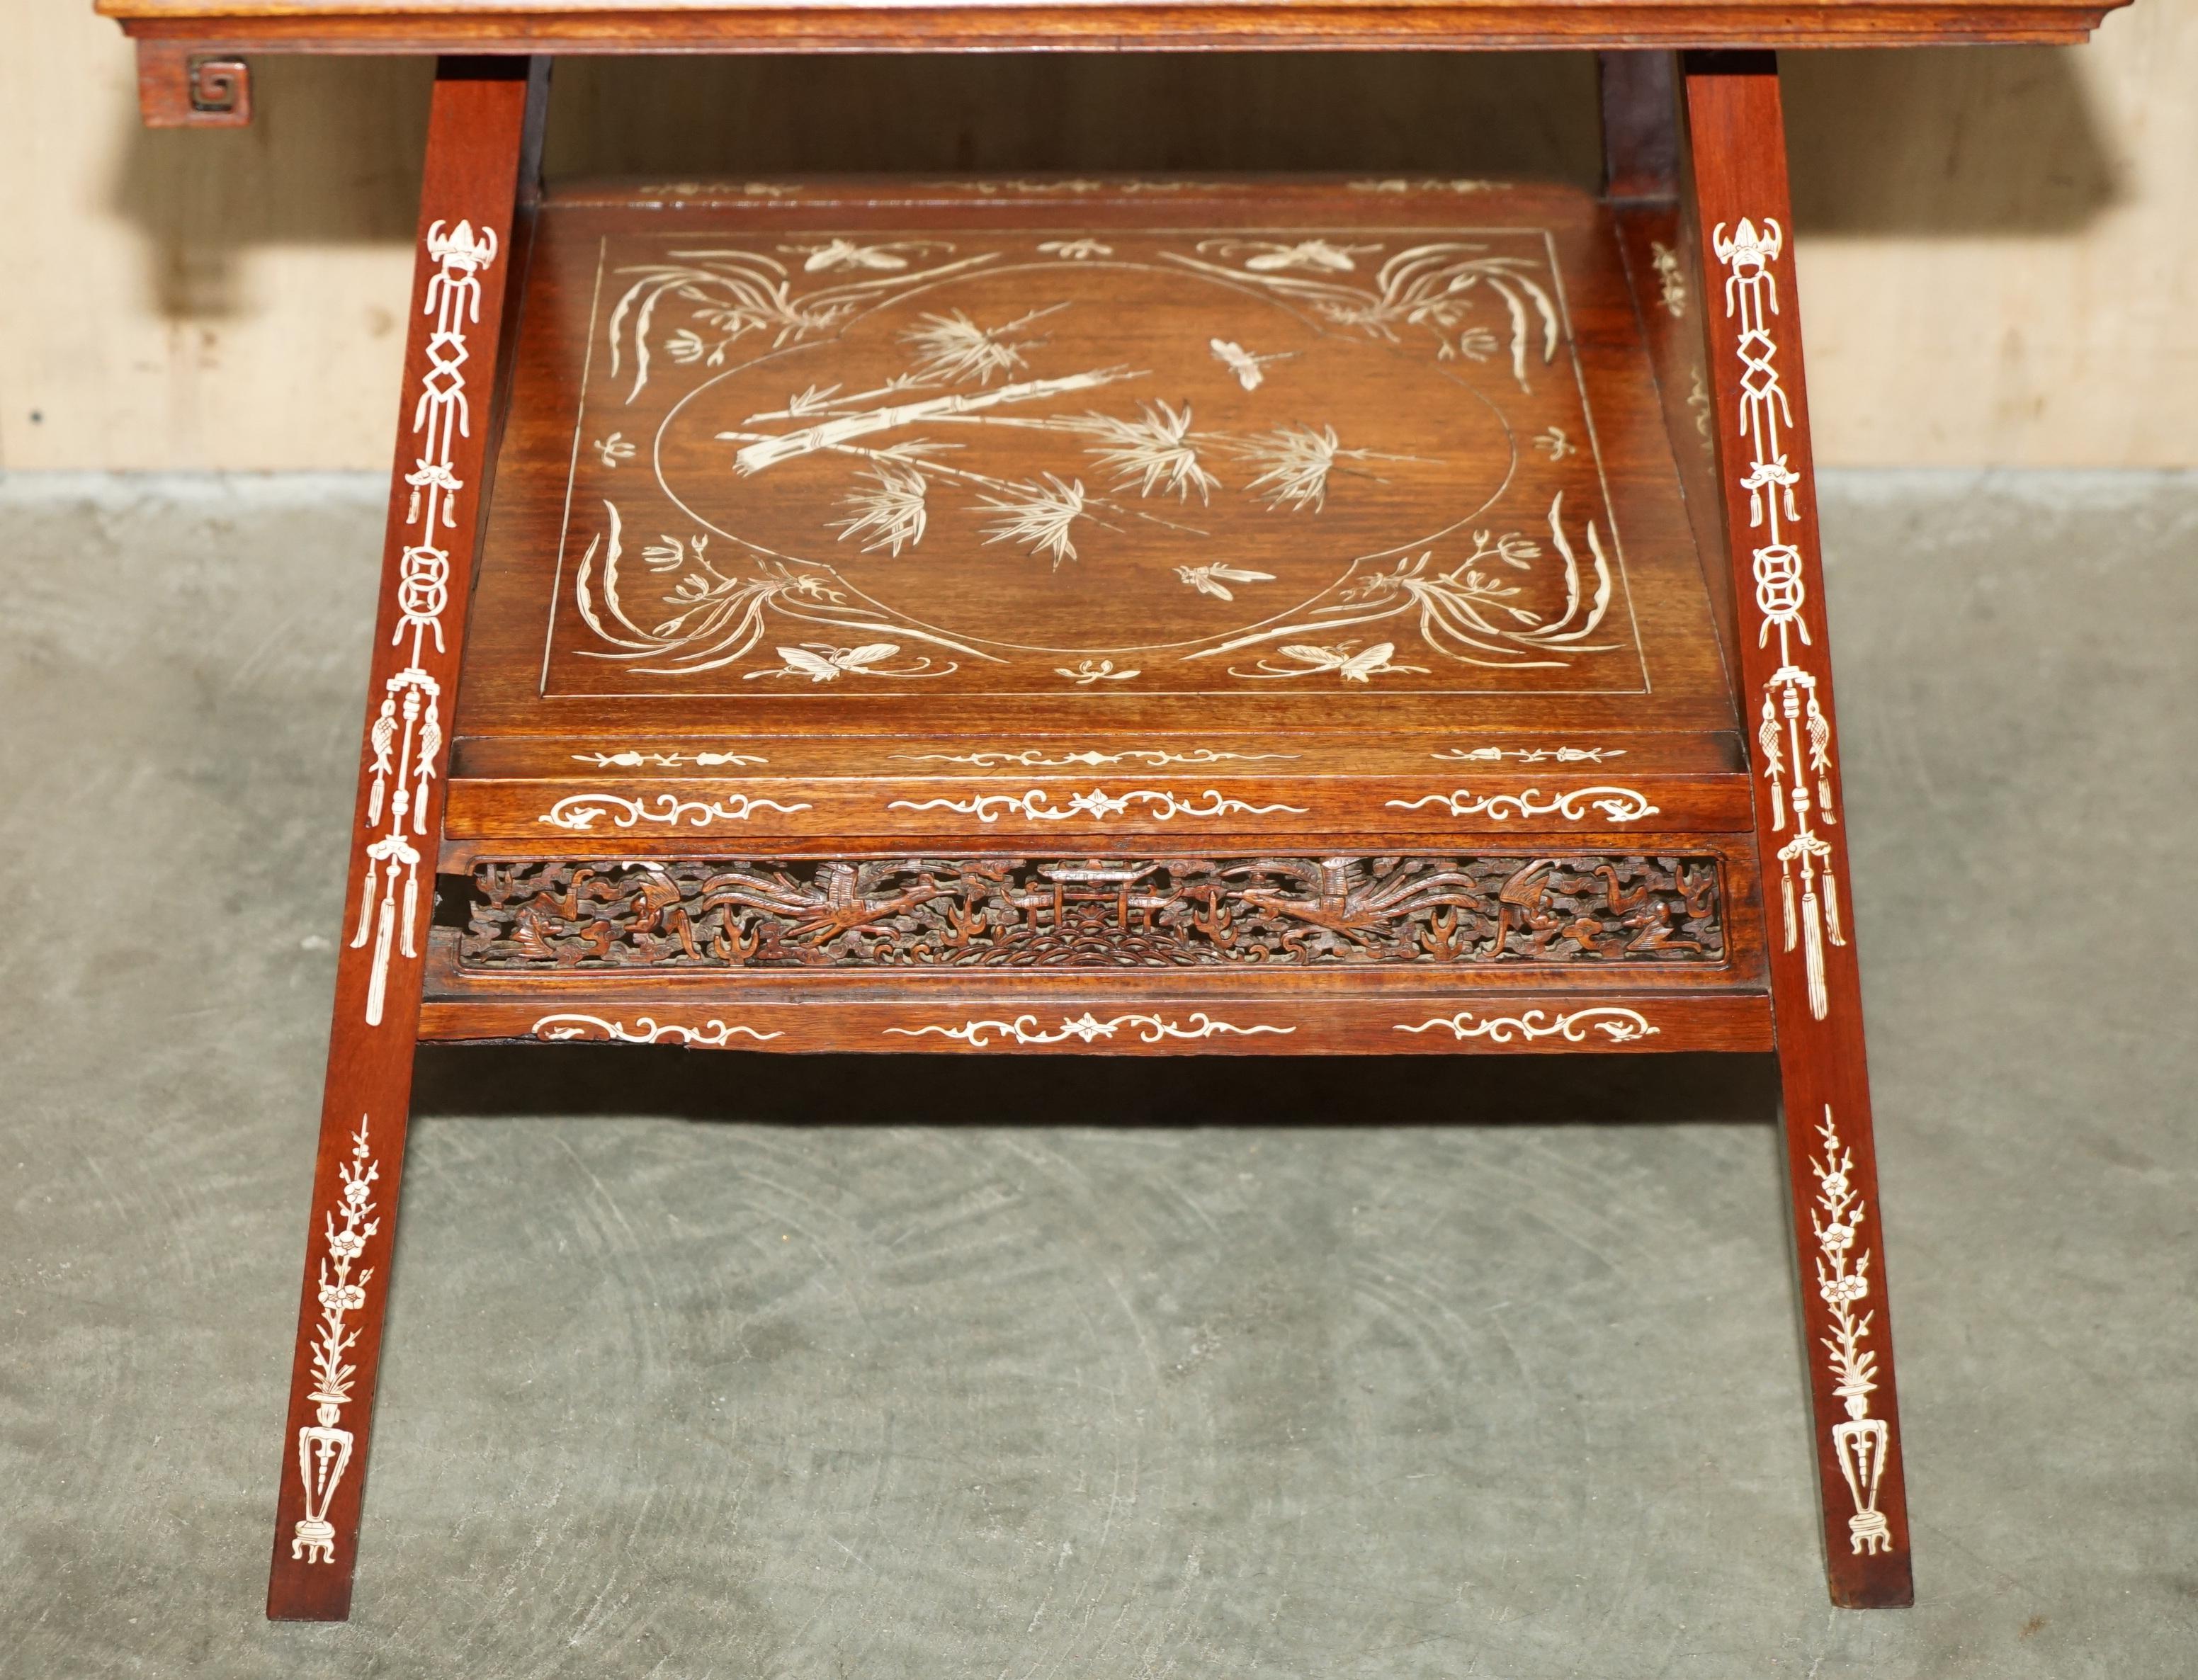 ANTIQUE CIRCA 1900ORNATELY CARVED AND HEAViLY INLAID CHINESE OCCASIONAL TABLE im Angebot 8